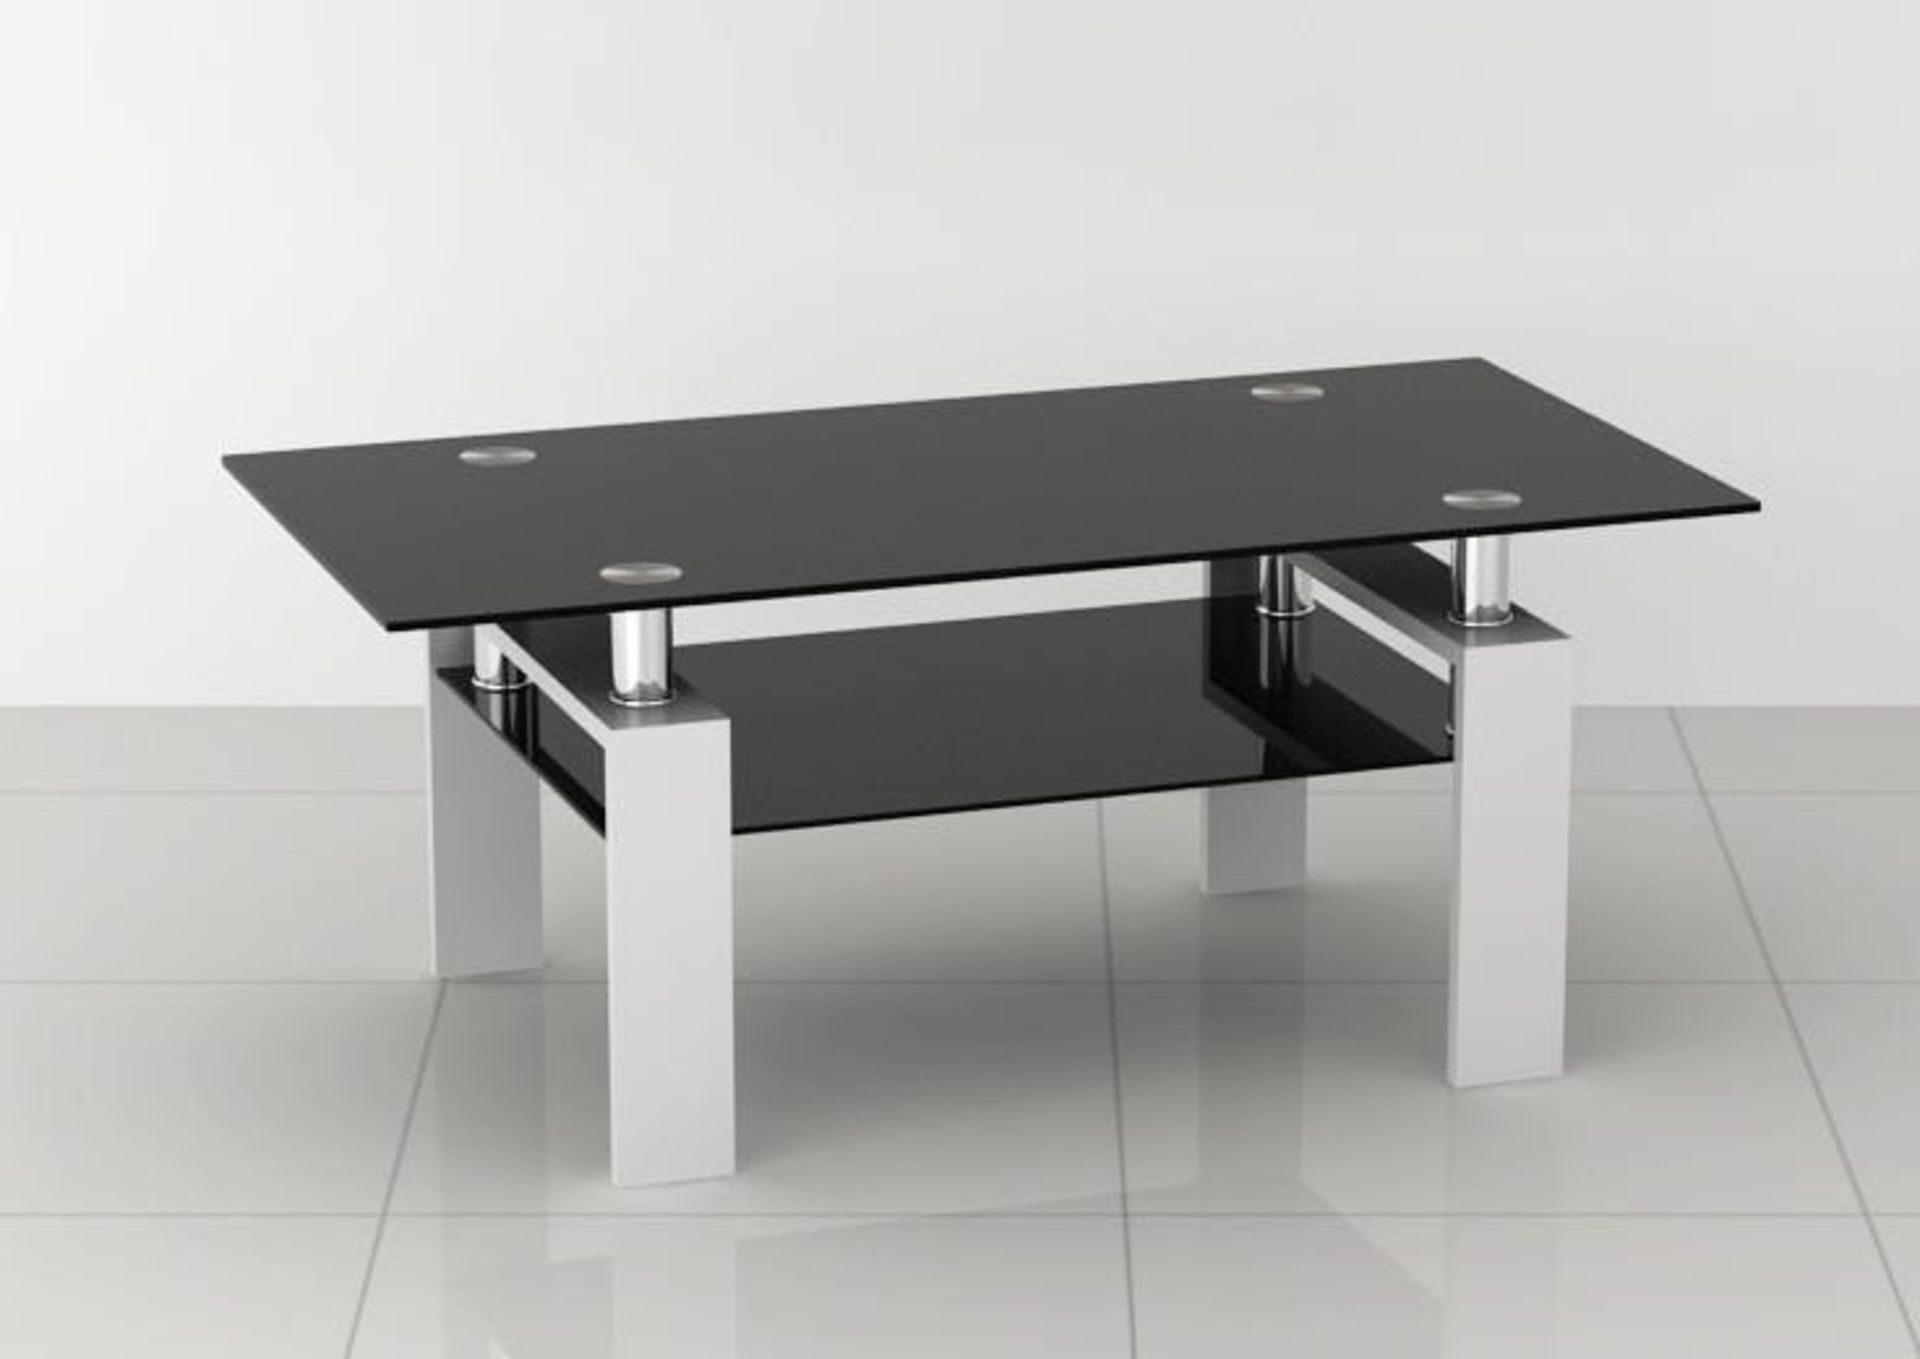 1 x Black Glass/White Coffee Table - Product Code CTB419BLKWHT (Brand New & Boxed)